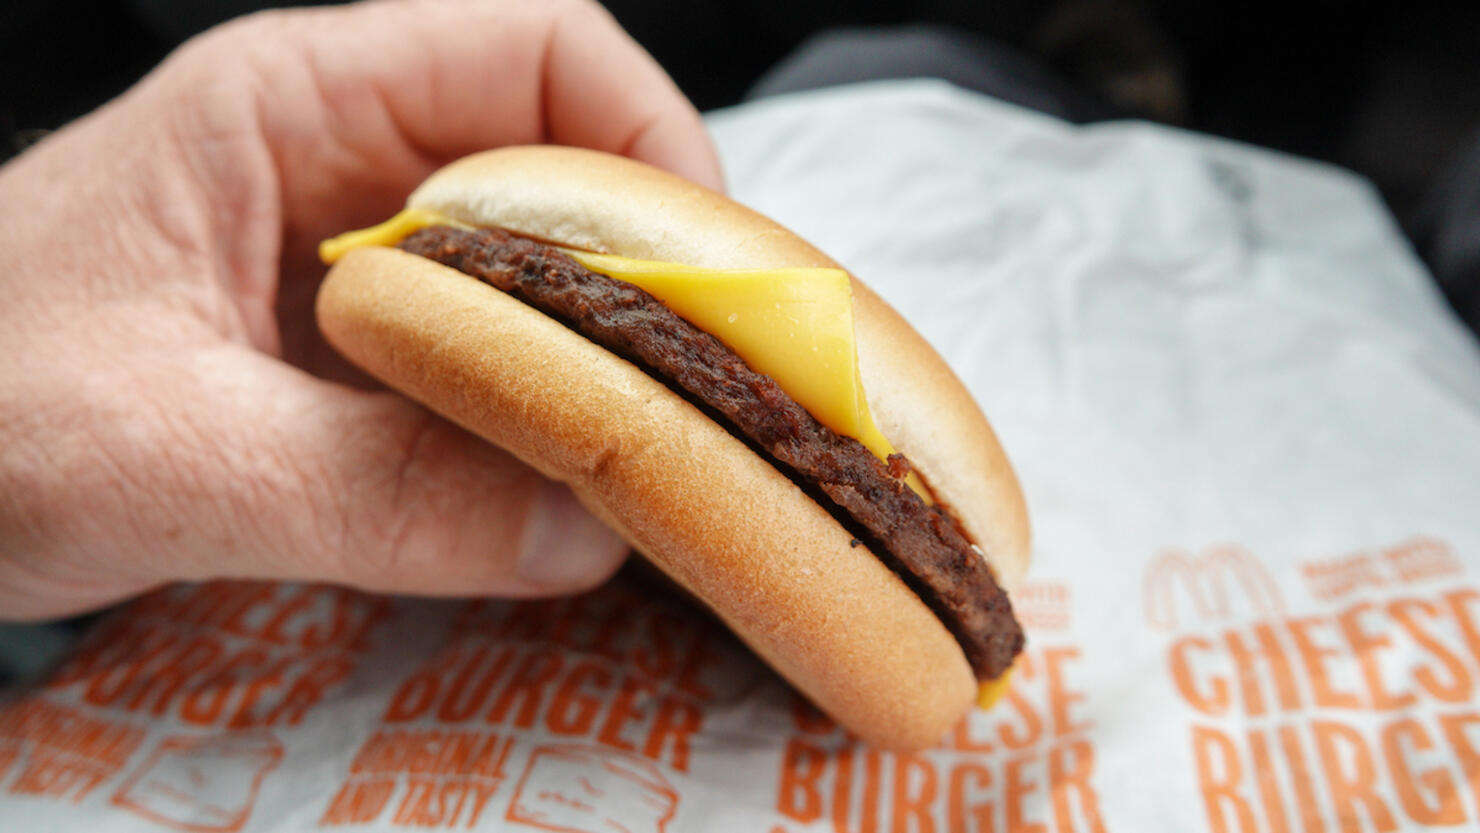 McDonald's Increases The Price Of Cheeseburger